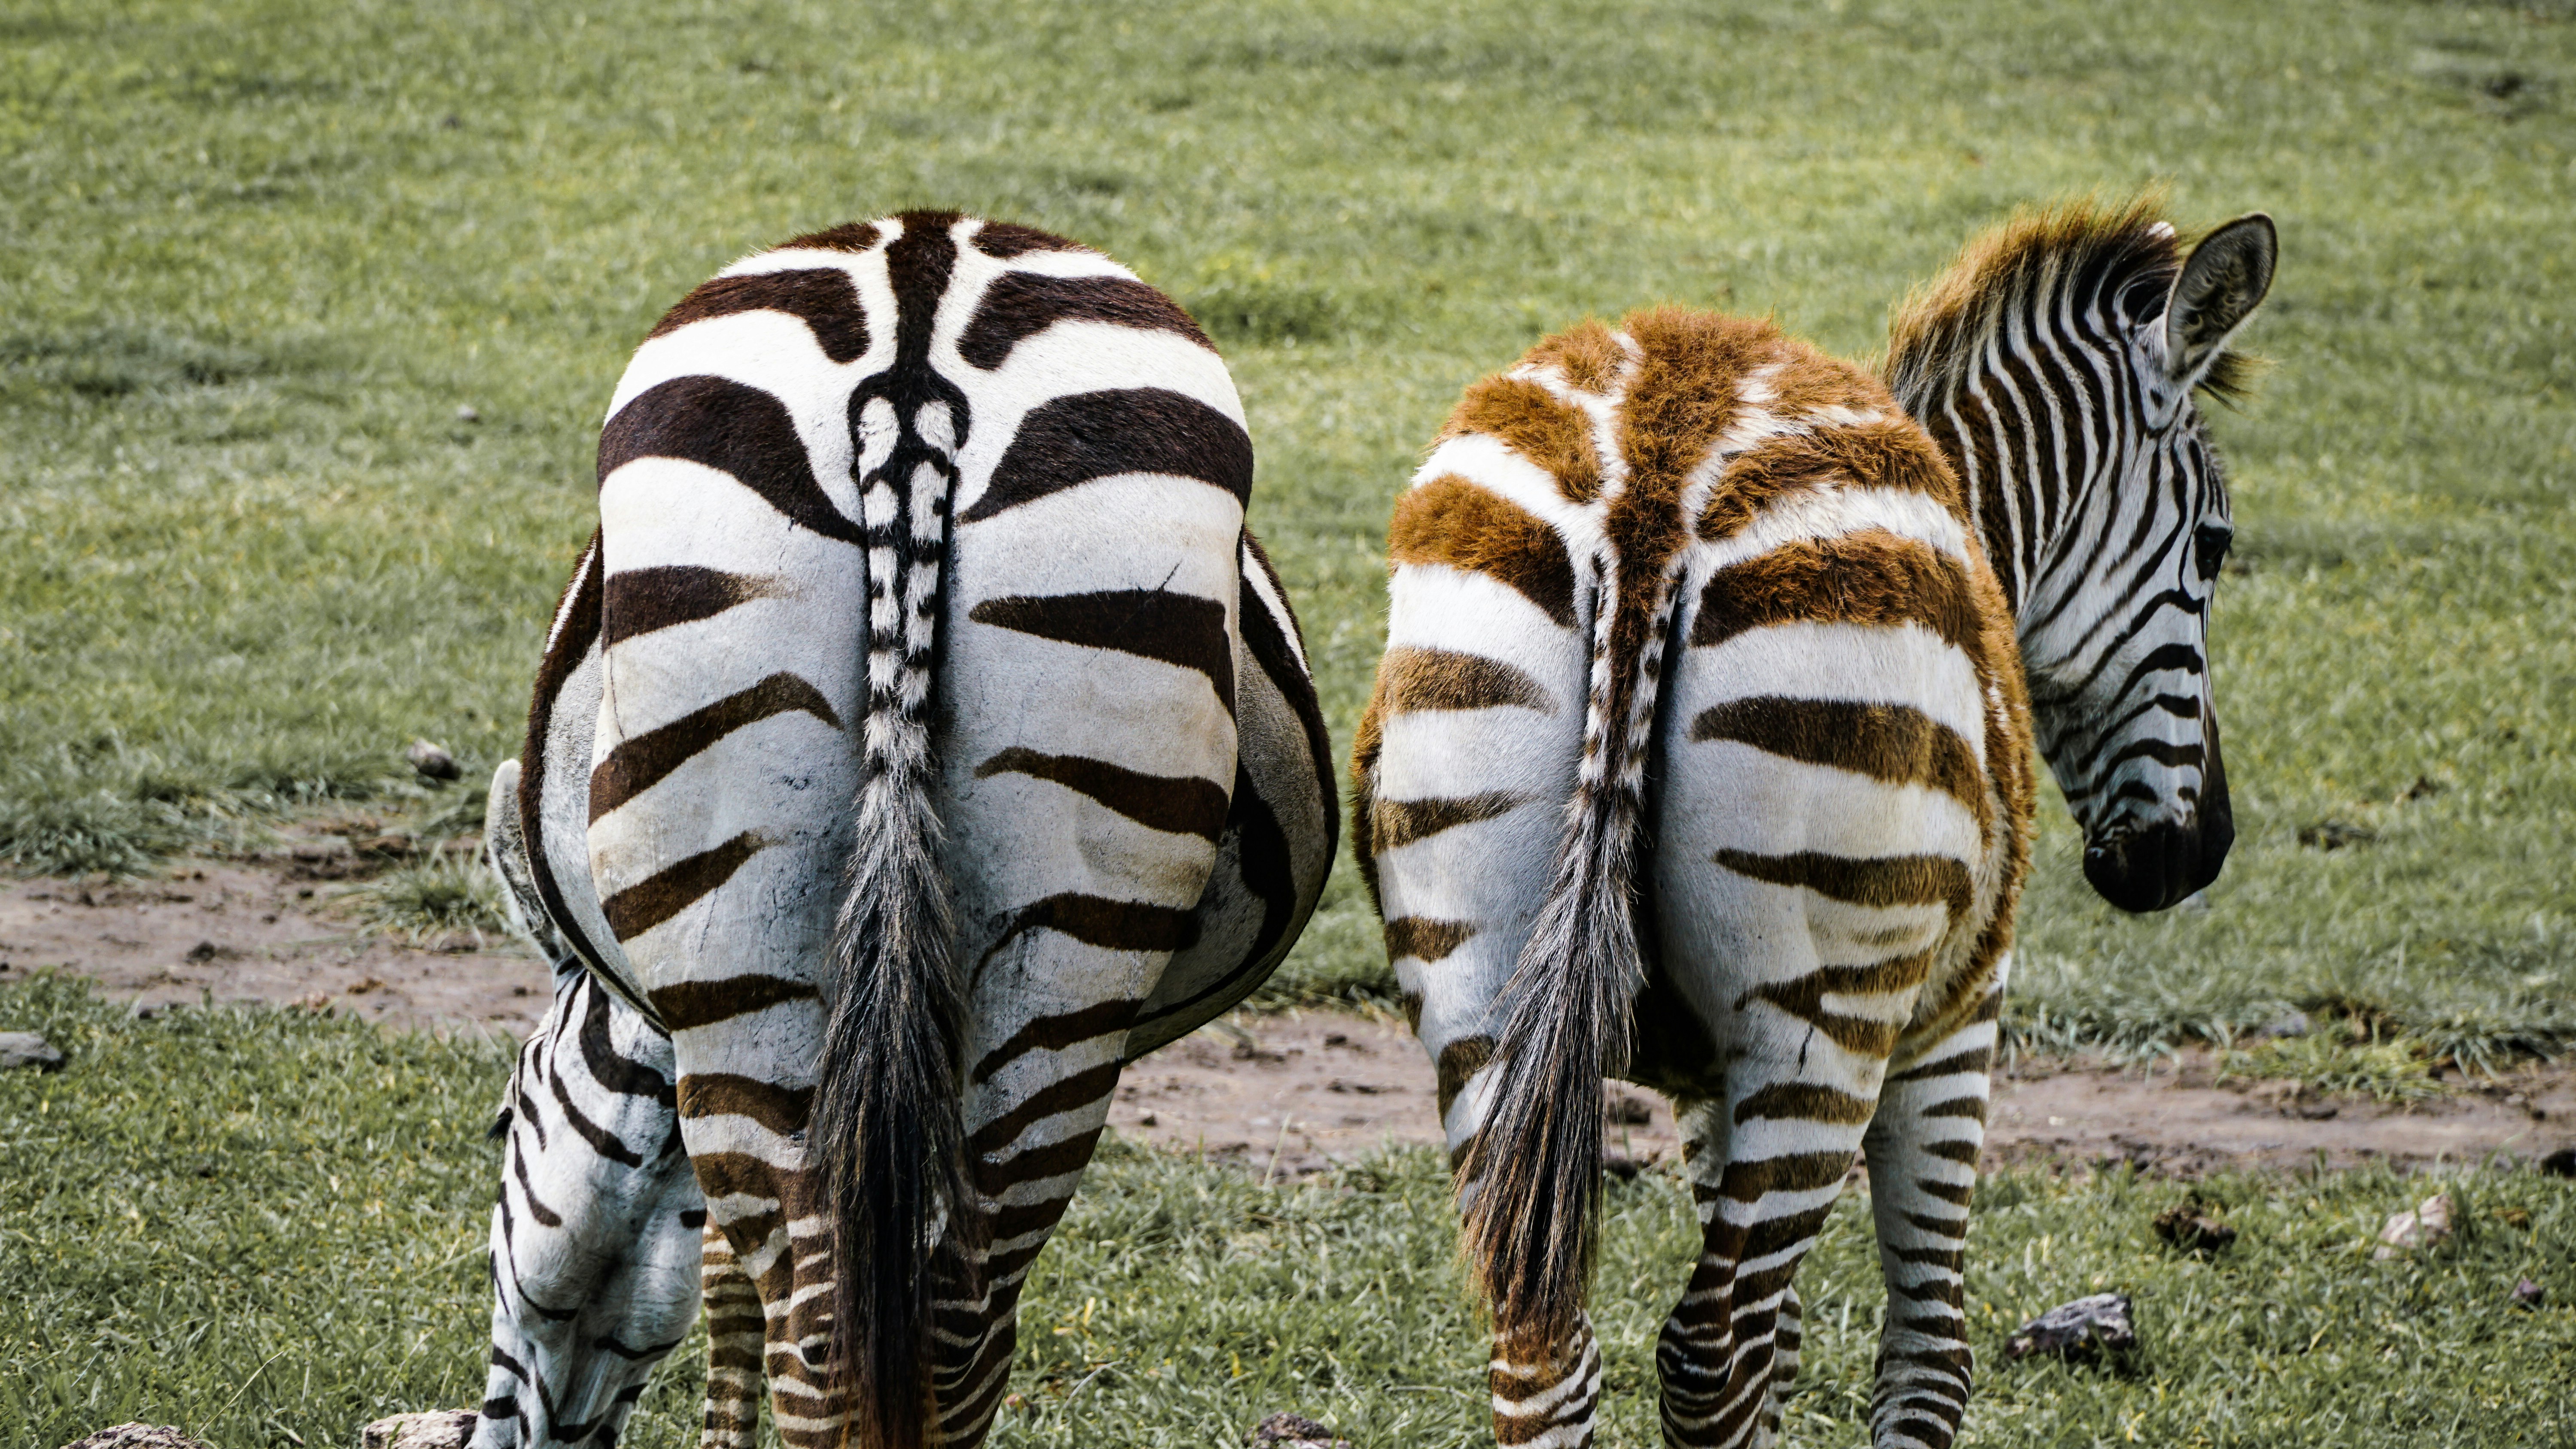 two zebra on grass field during daytime